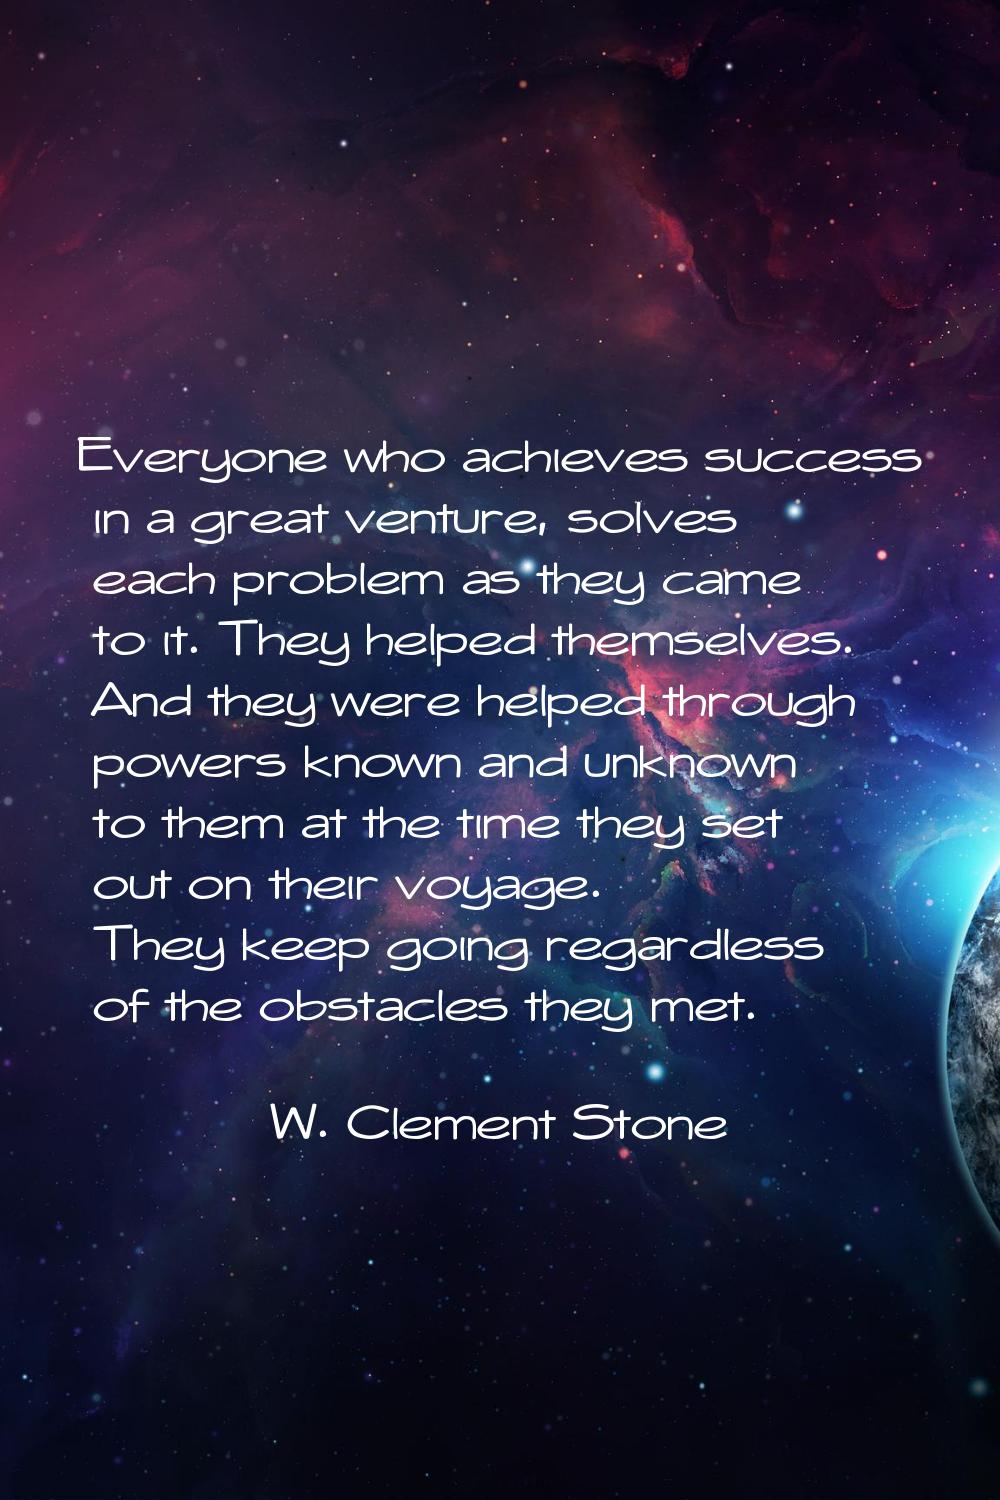 Everyone who achieves success in a great venture, solves each problem as they came to it. They help